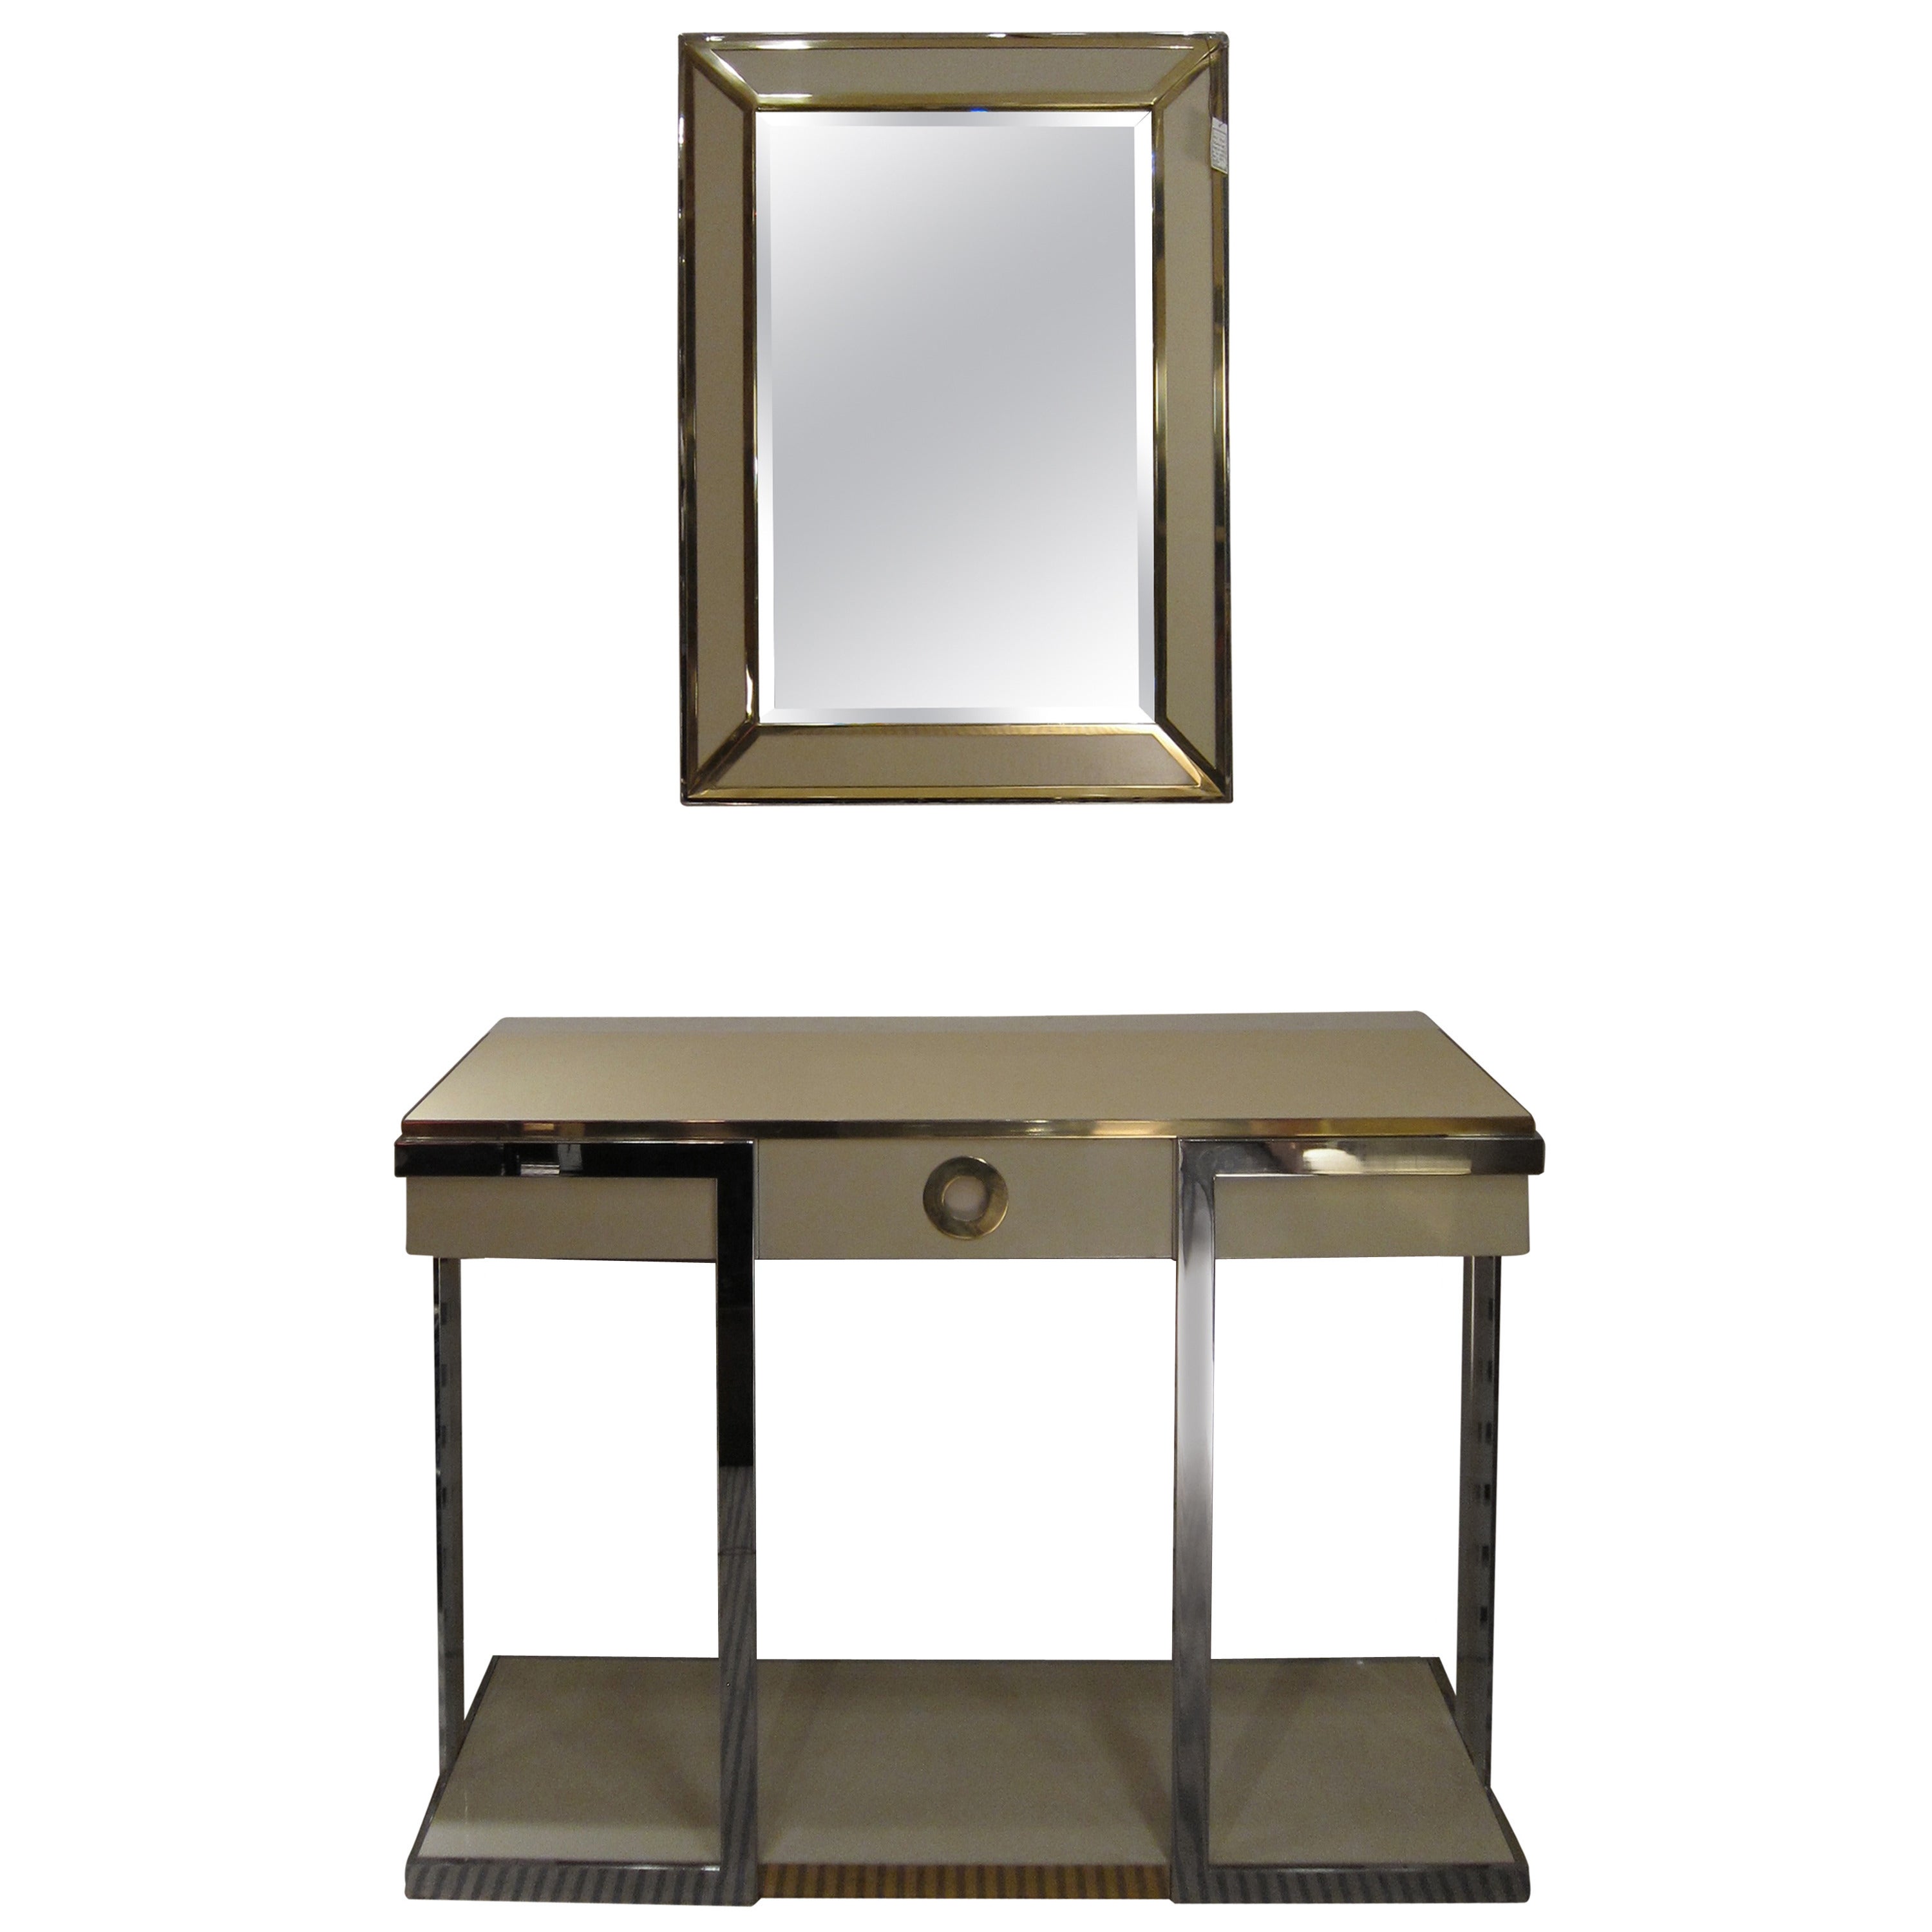 Willy Rizzo for Sabot Production Steel and Lacquer Console and Mirror, 1970s For Sale